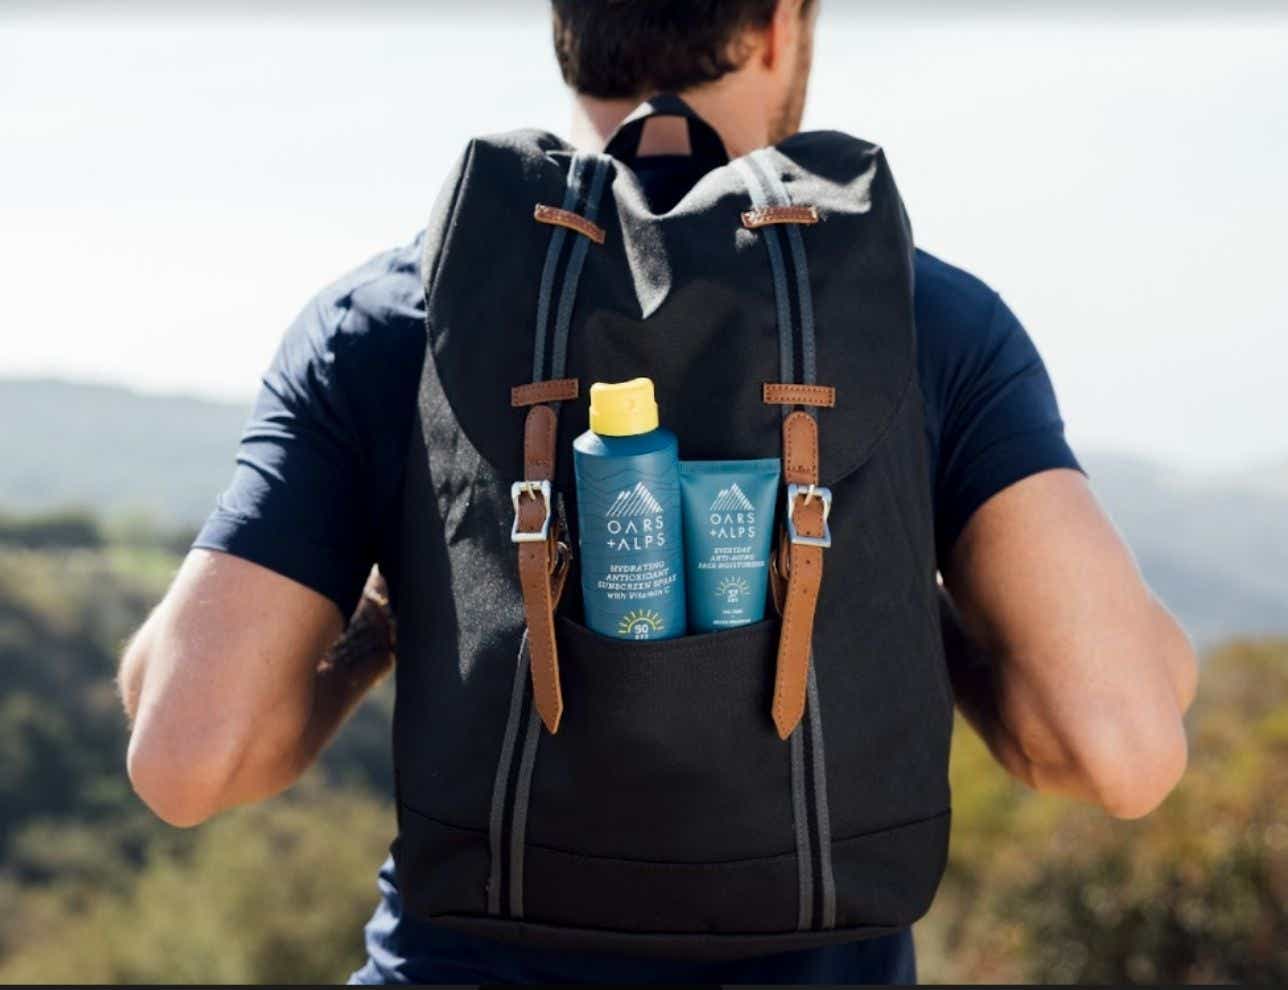 Oars + Alps products in backpack